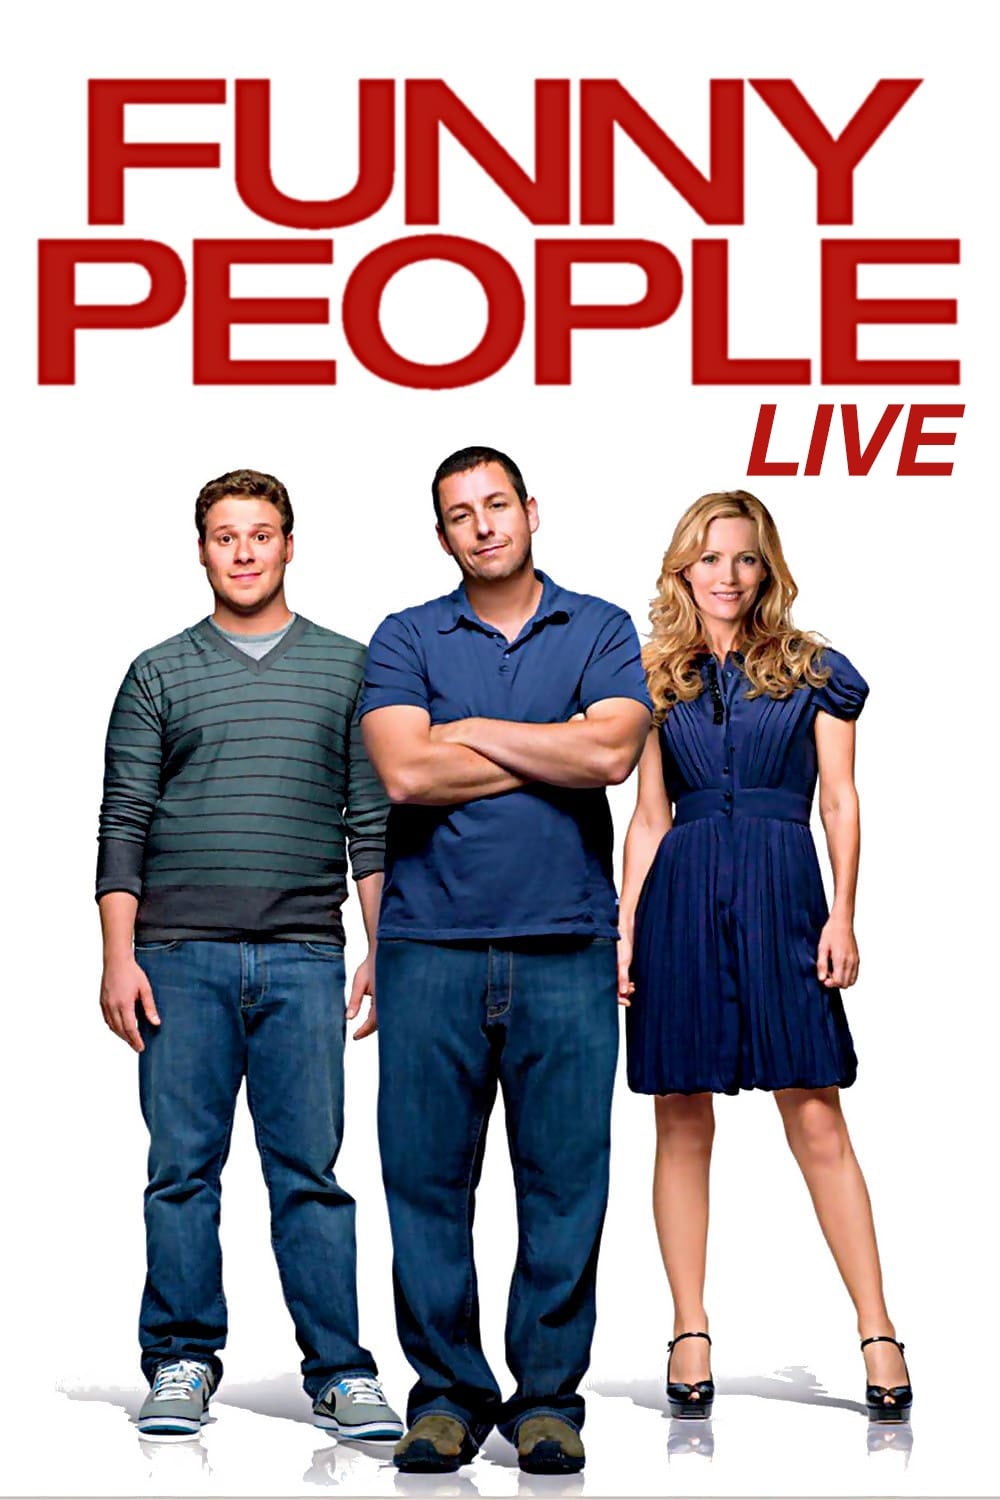 Funny People: Live